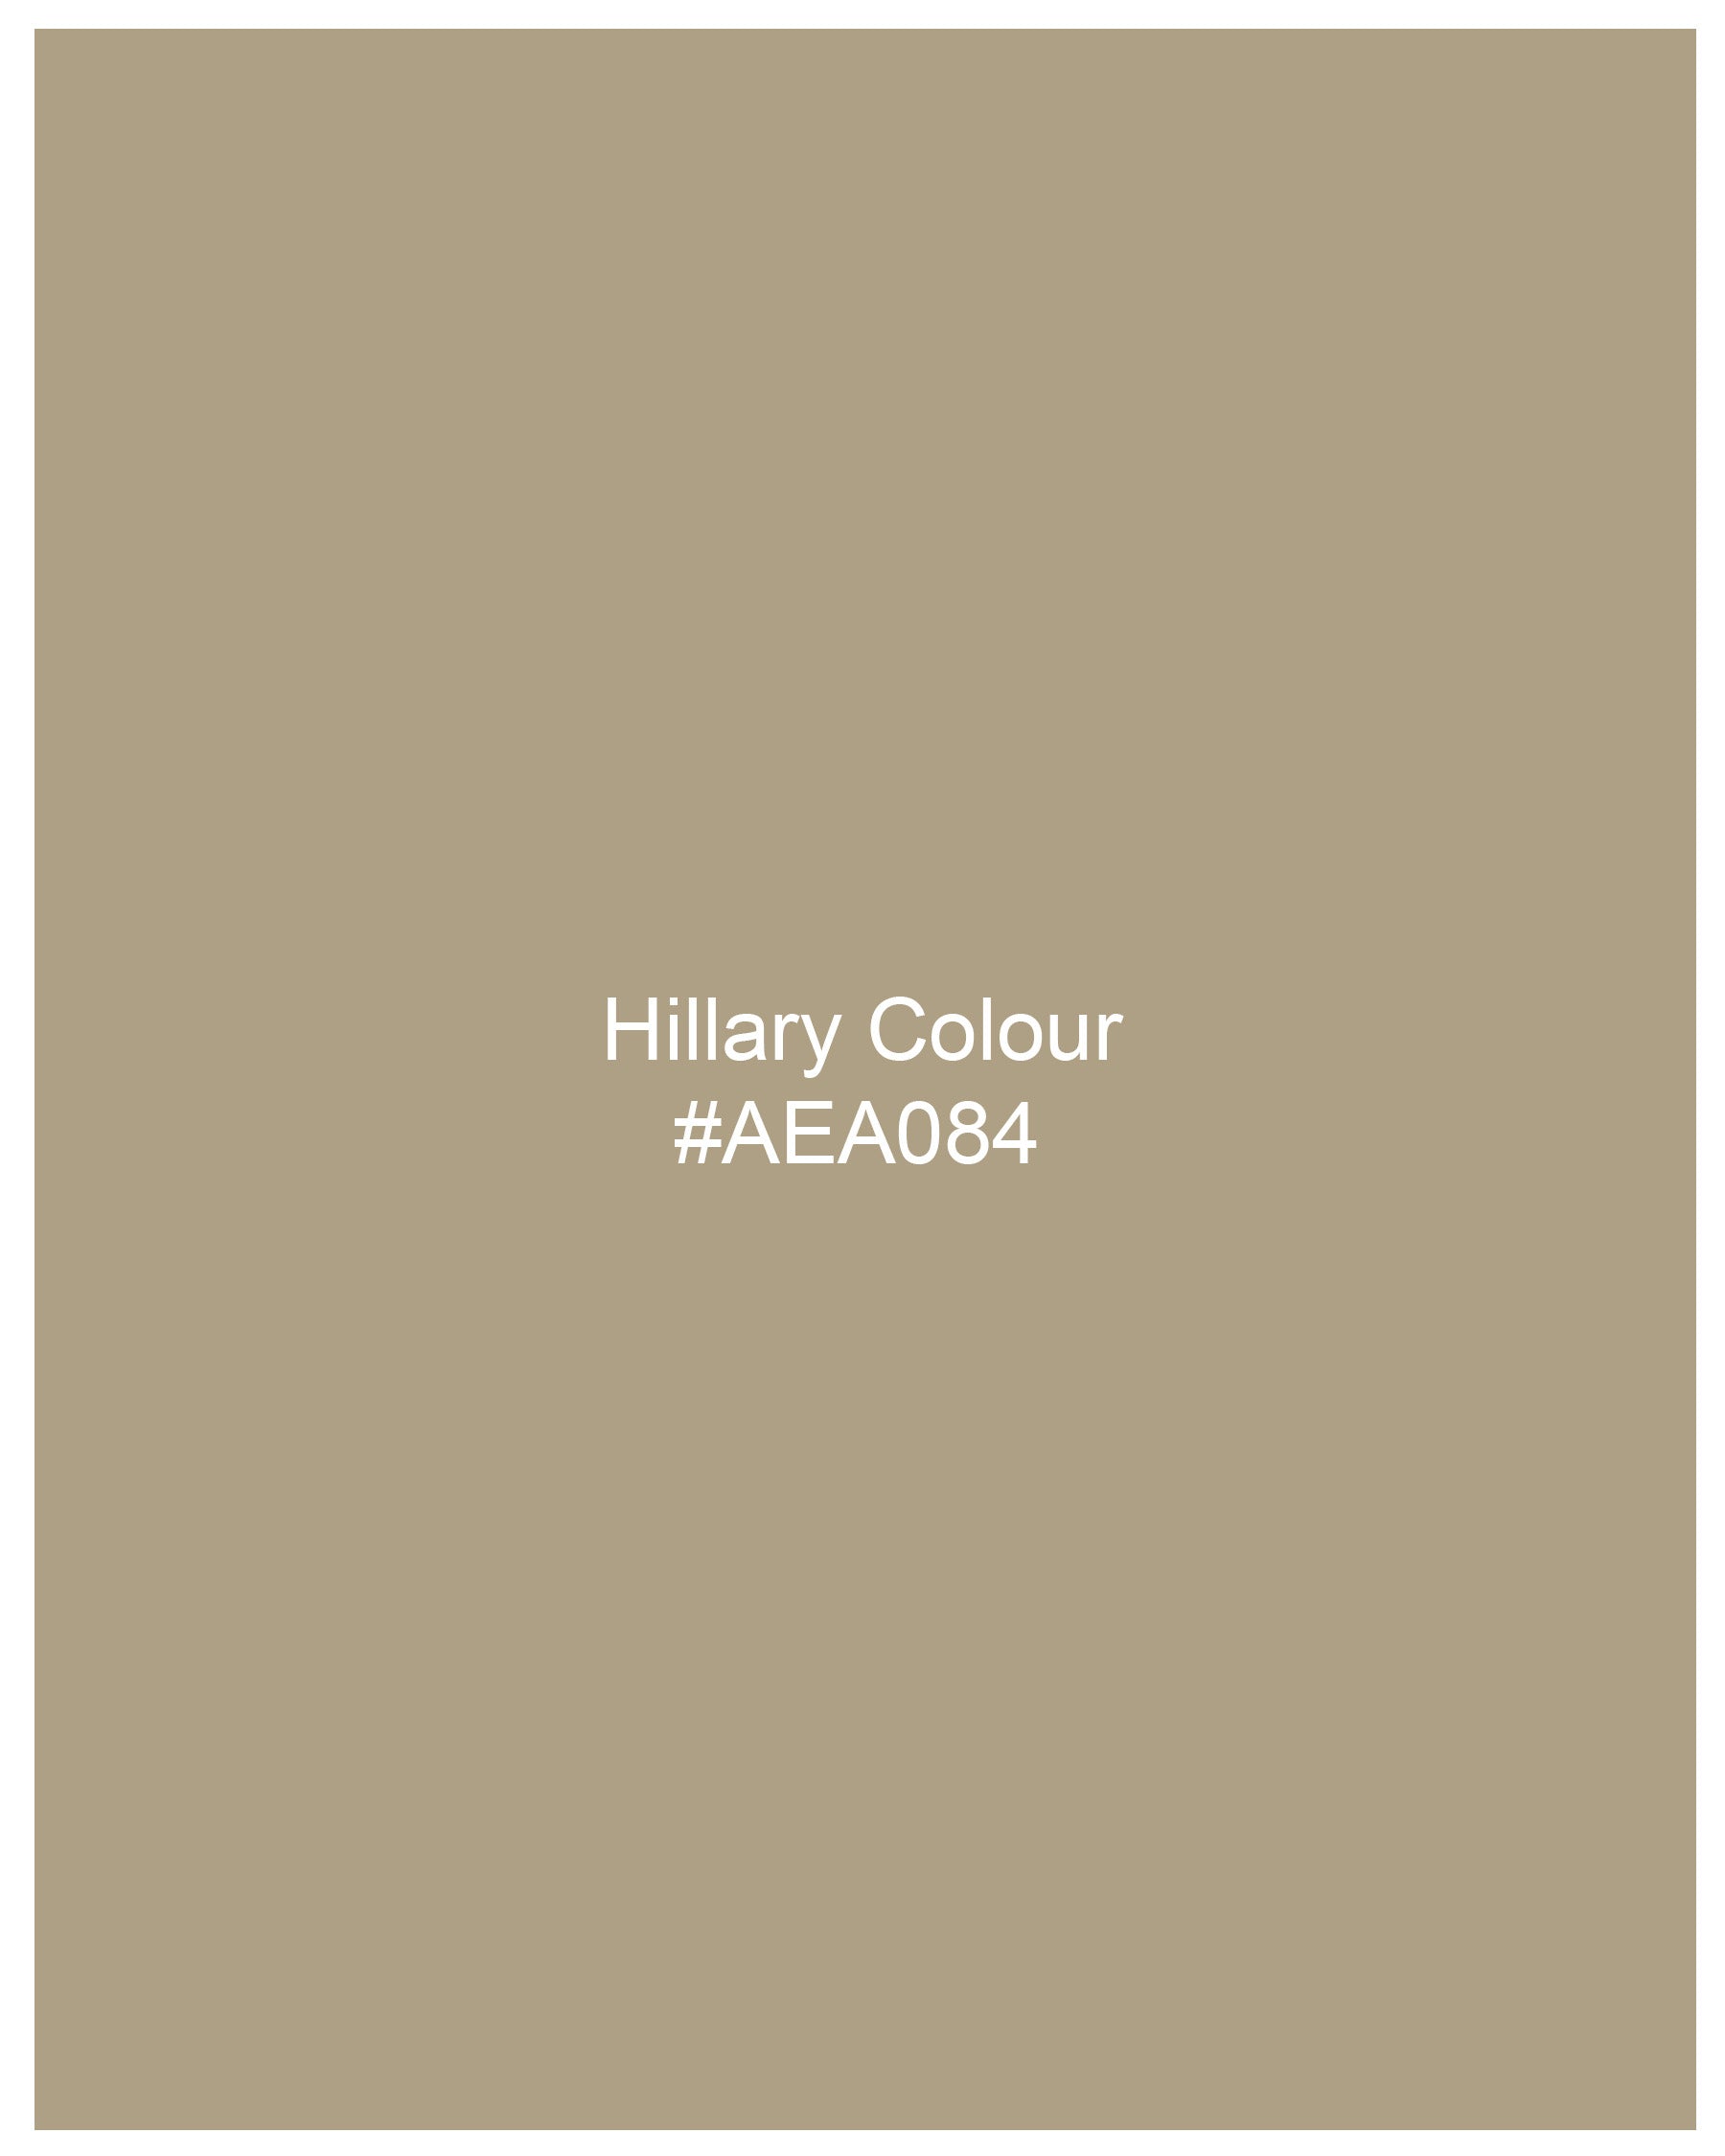 Hillary Light Brown Double Breasted Blazer BL2090-DB-36, BL2090-DB-38, BL2090-DB-40, BL2090-DB-42, BL2090-DB-44, BL2090-DB-46, BL2090-DB-48, BL2090-DB-50, BL2090-DB-52, BL2090-DB-54, BL2090-DB-56, BL2090-DB-58, BL2090-DB-60